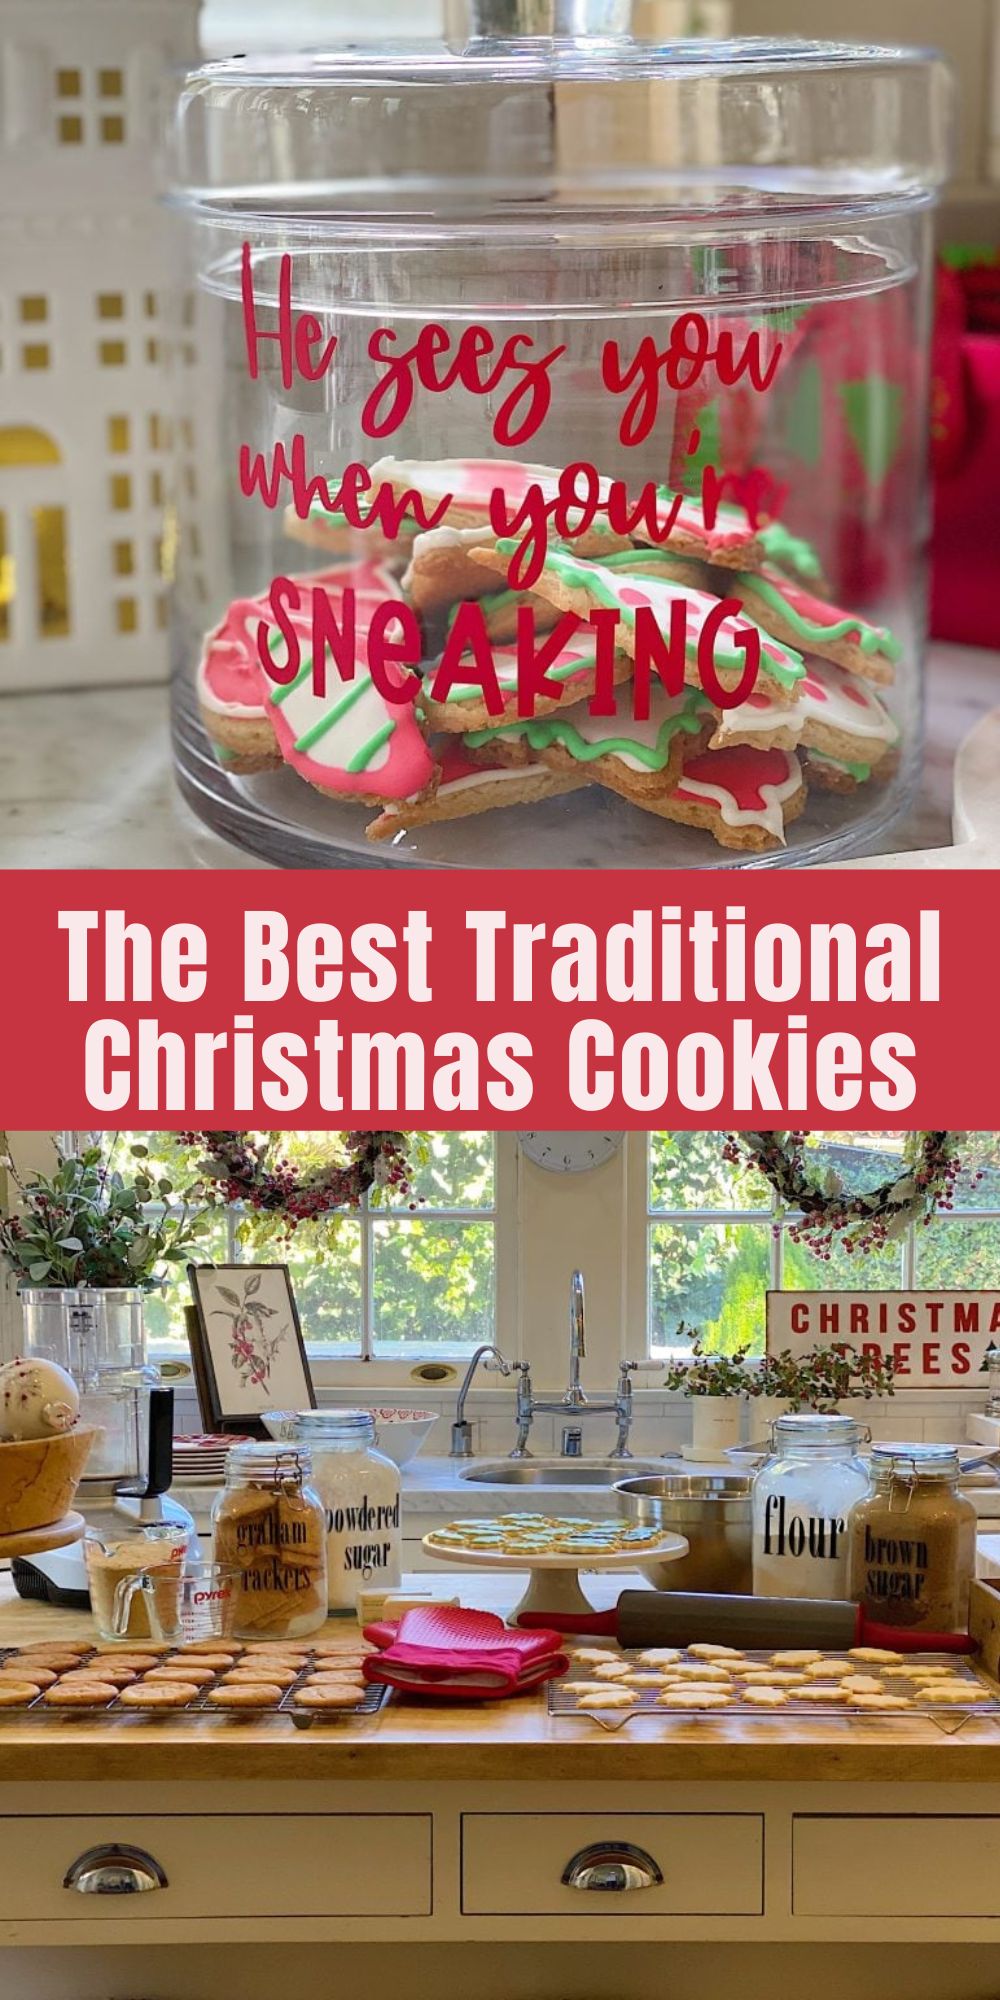 I love to make sugar cookies so today I am sharing my best traditional Christmas cookies. All of them use my basic sugar cookie recipe!